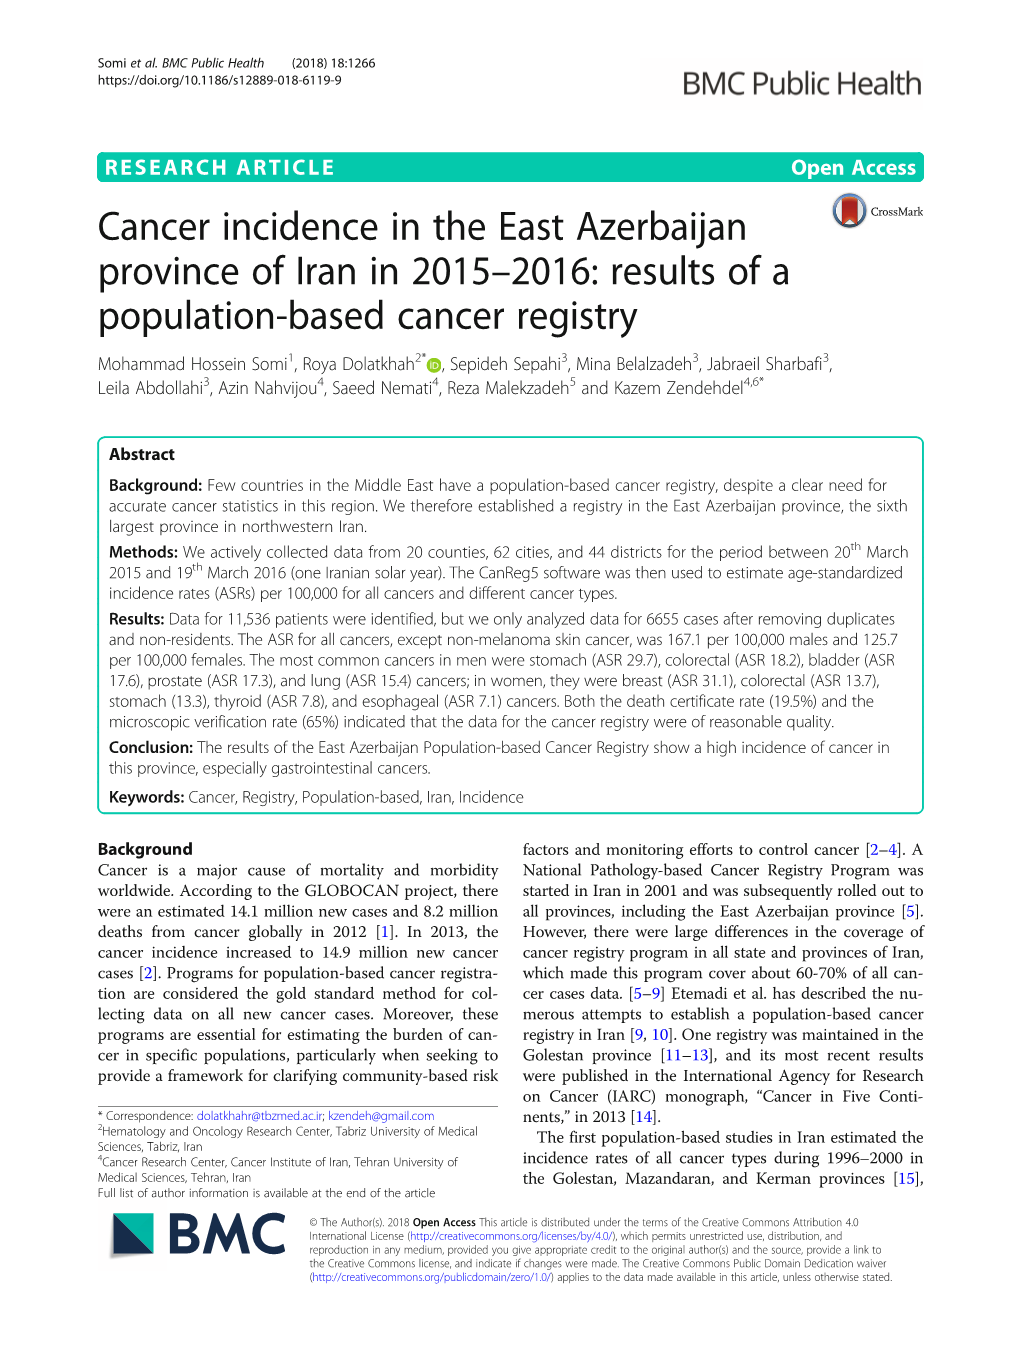 Cancer Incidence in the East Azerbaijan Province of Iran in 2015